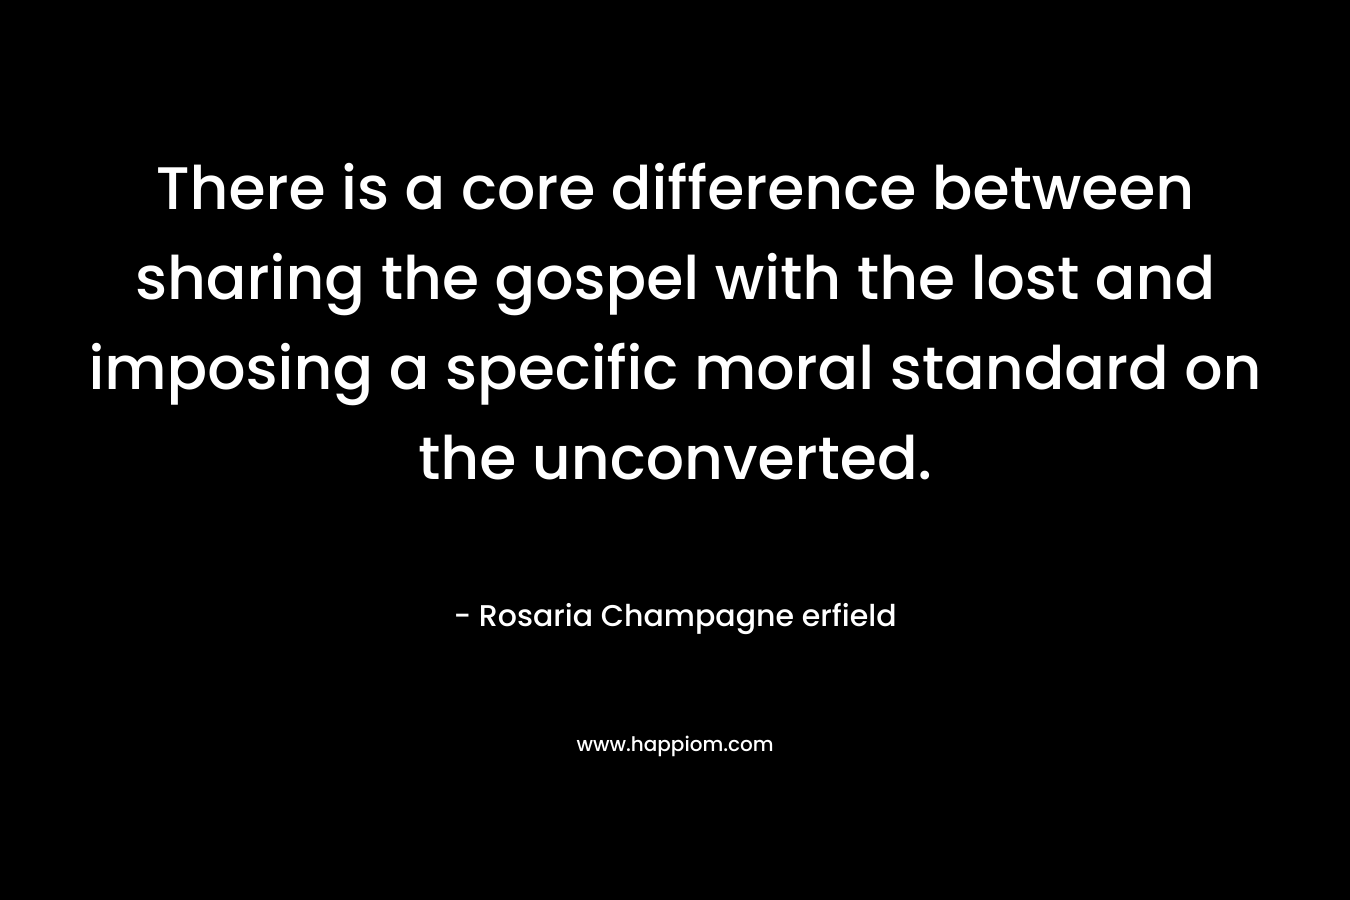 There is a core difference between sharing the gospel with the lost and imposing a specific moral standard on the unconverted. – Rosaria Champagne erfield